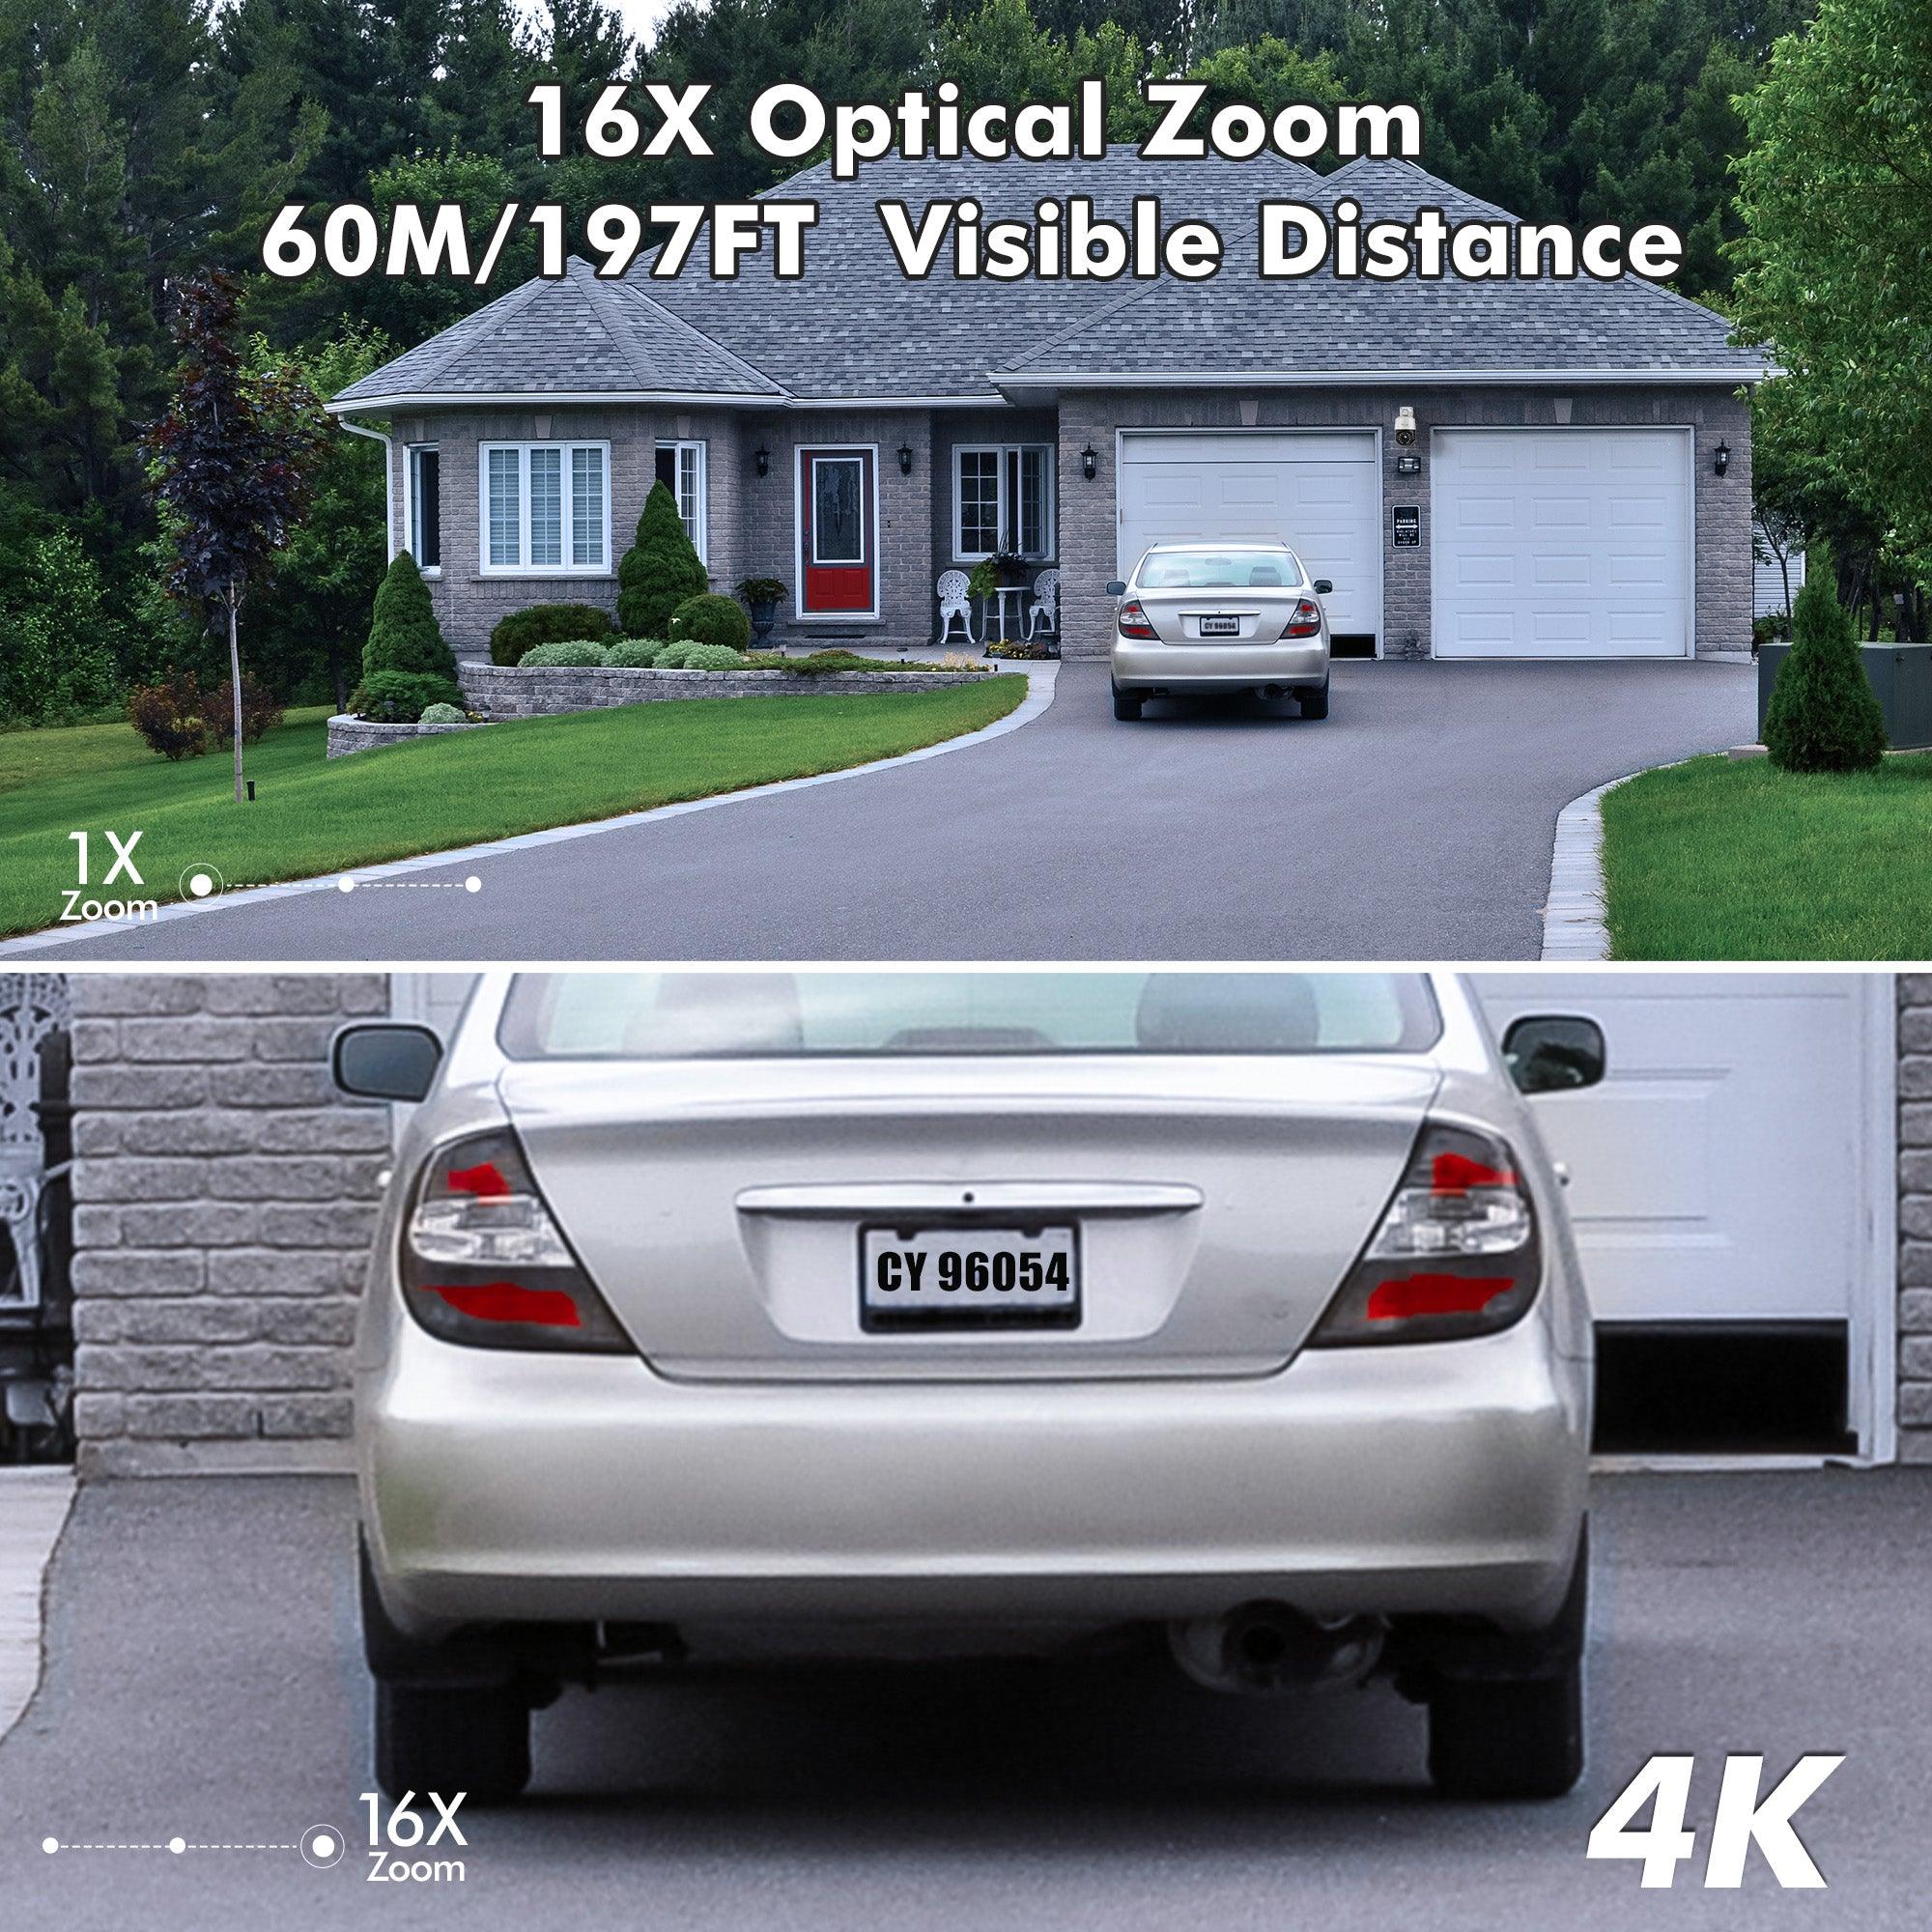 4K 8MP 16X Optical Zoom Outdoor Wi-Fi Camera with 5GHz/2.4GHz Auto Cruise/Tracking/Zoom - uk.ctronics